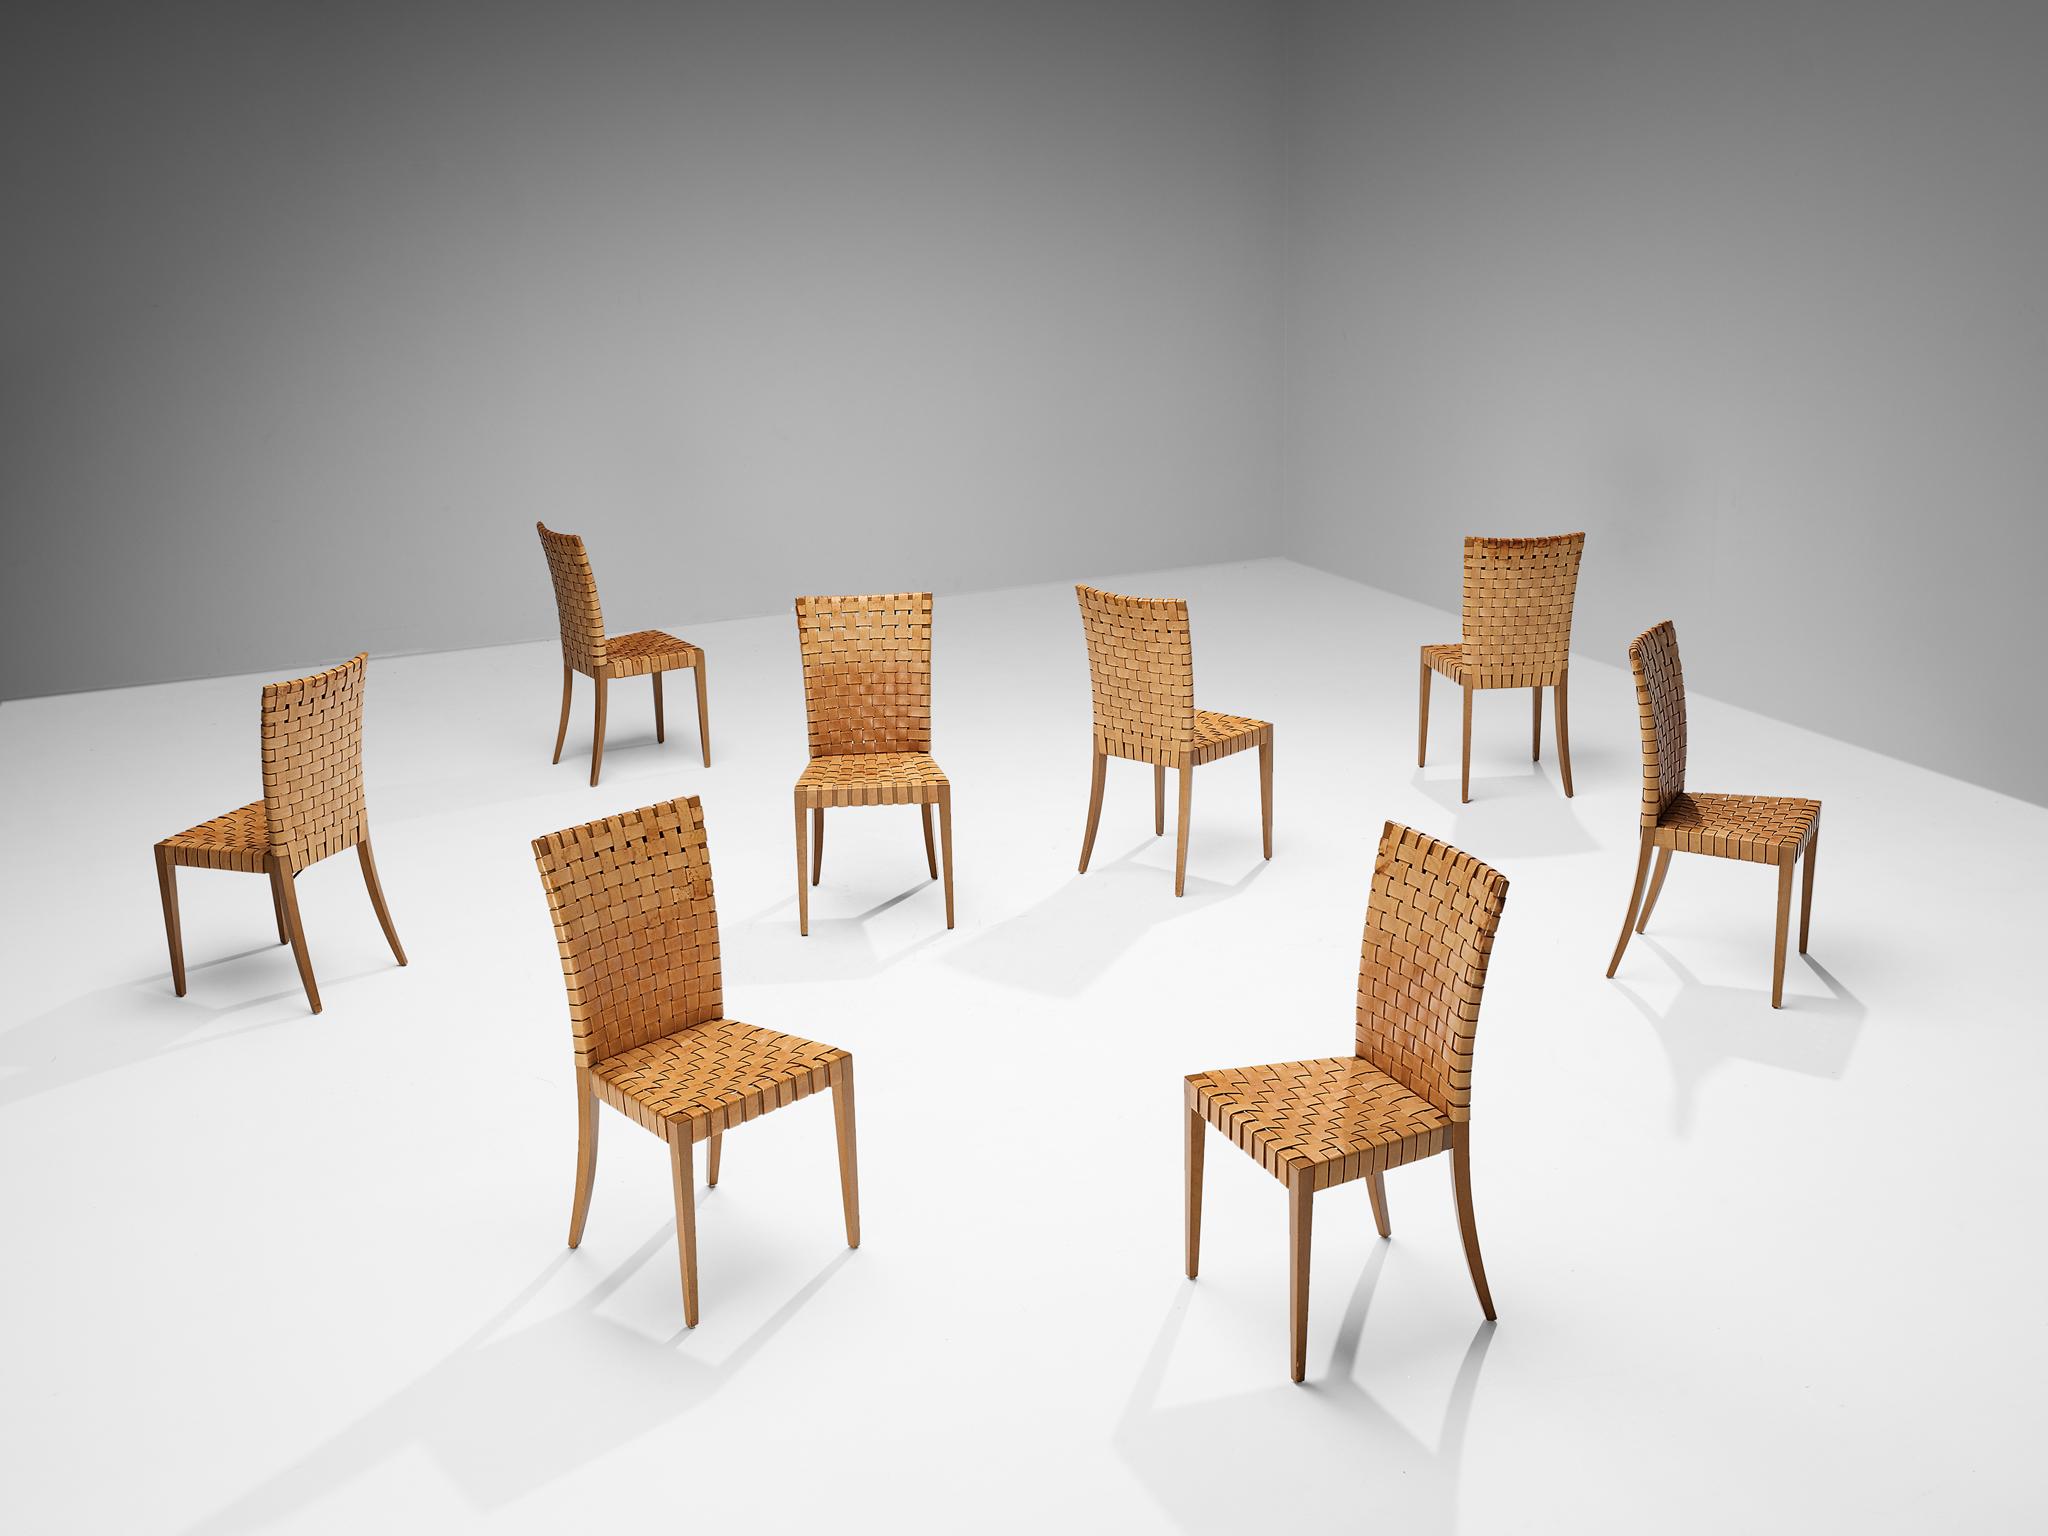 Set of eight dining chairs, cognac brown patinated leather, stained beech, Italy, 1970s

These dining chairs of Italian origin exemplify exquisite craftsmanship, skillfully rendered with a fully braided leather strap construction. This technique